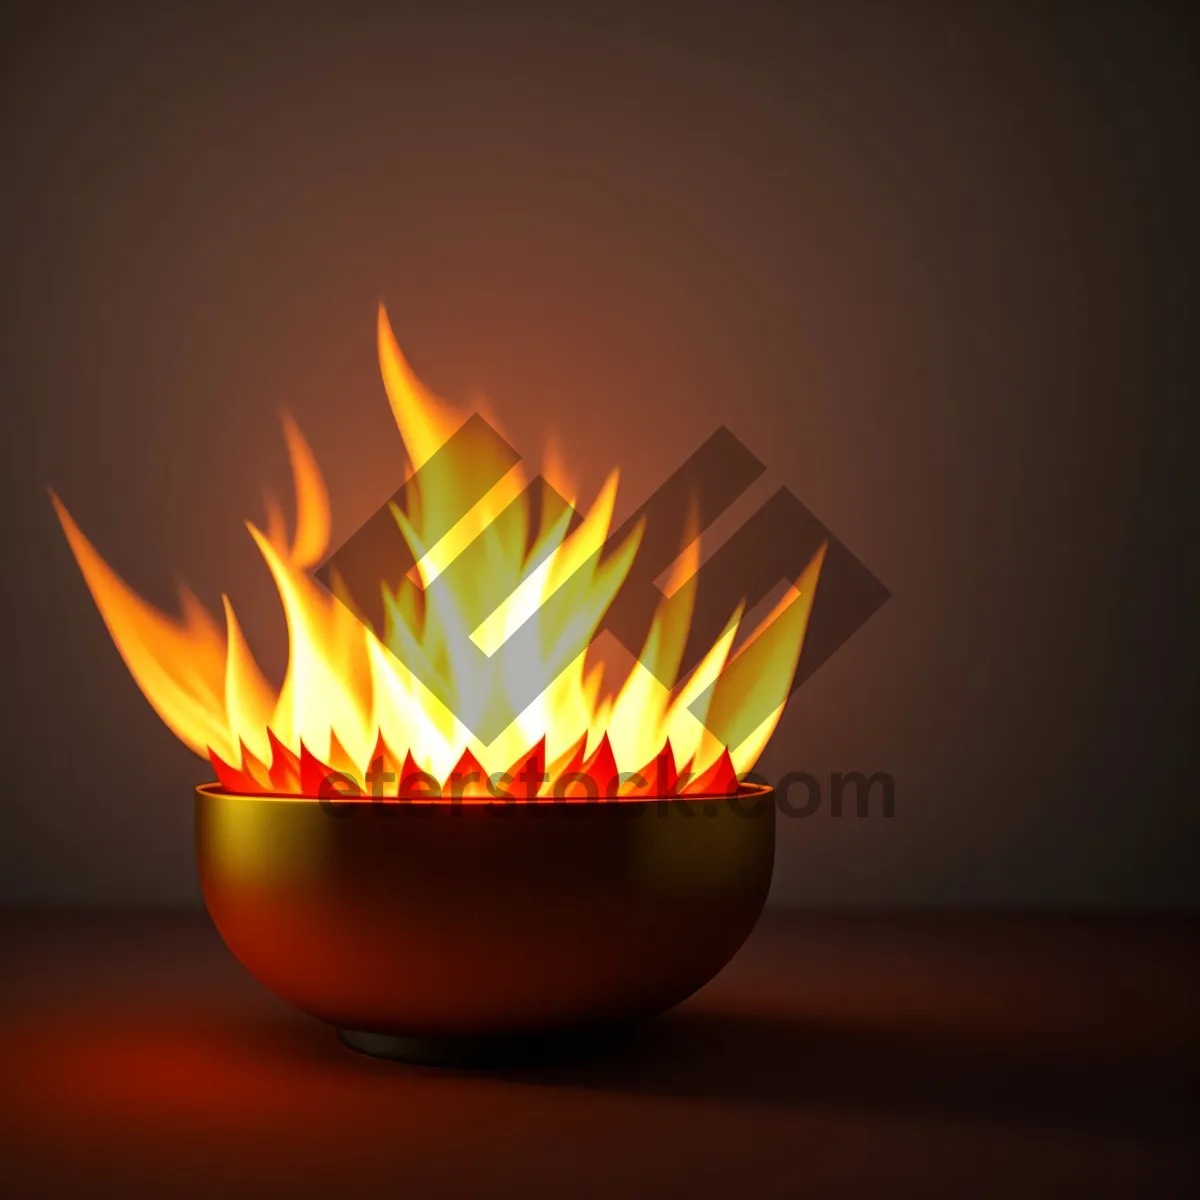 Picture of Blazing Fire Icon: Intense Flames and Hot Embers